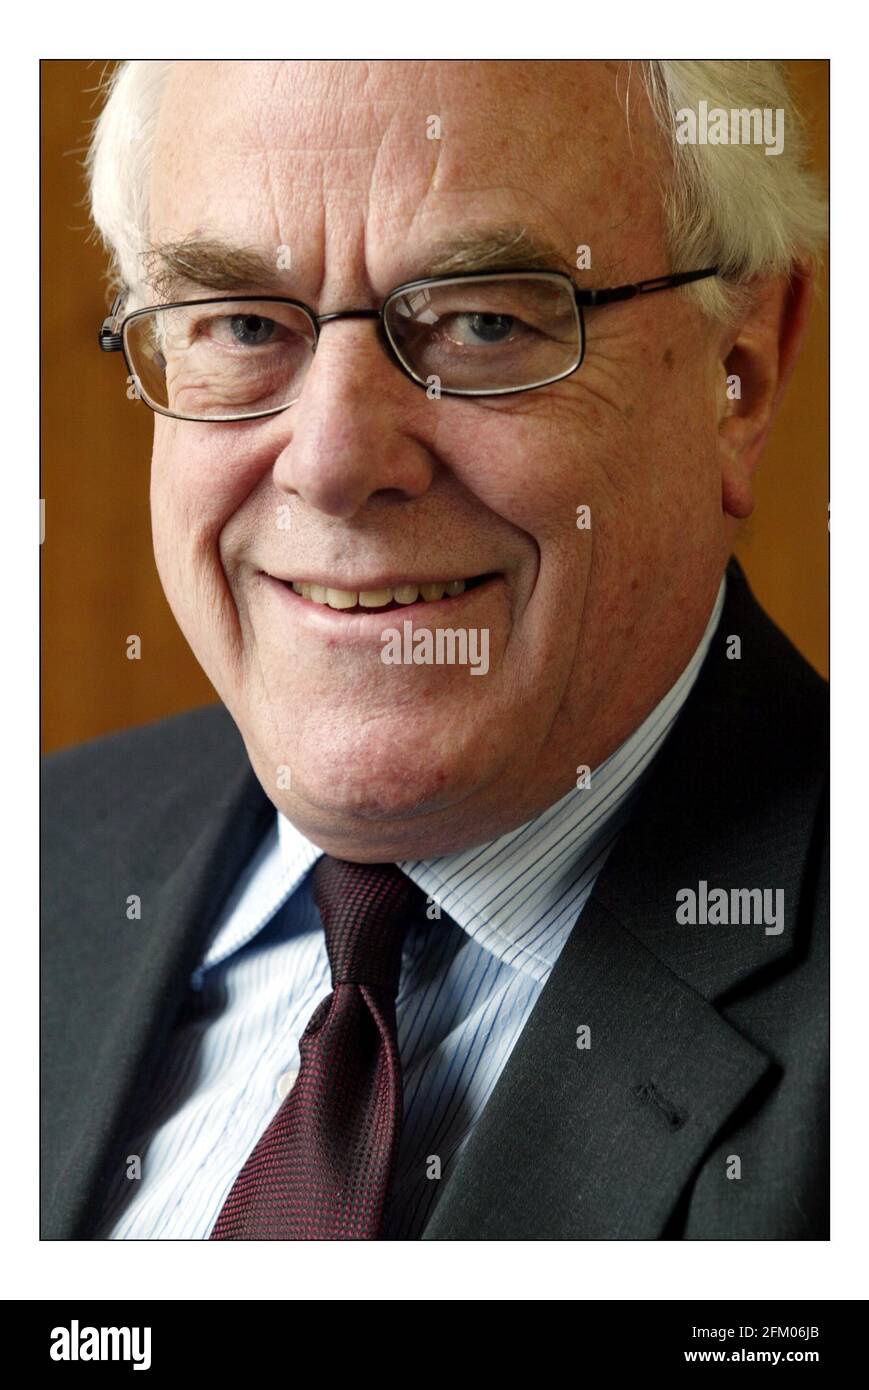 Stephen Nickell a member of the Monetary Policy Committee in his office in the Bank of England.Pic DAVID SANDISON. 25/2/2005 Stock Photo